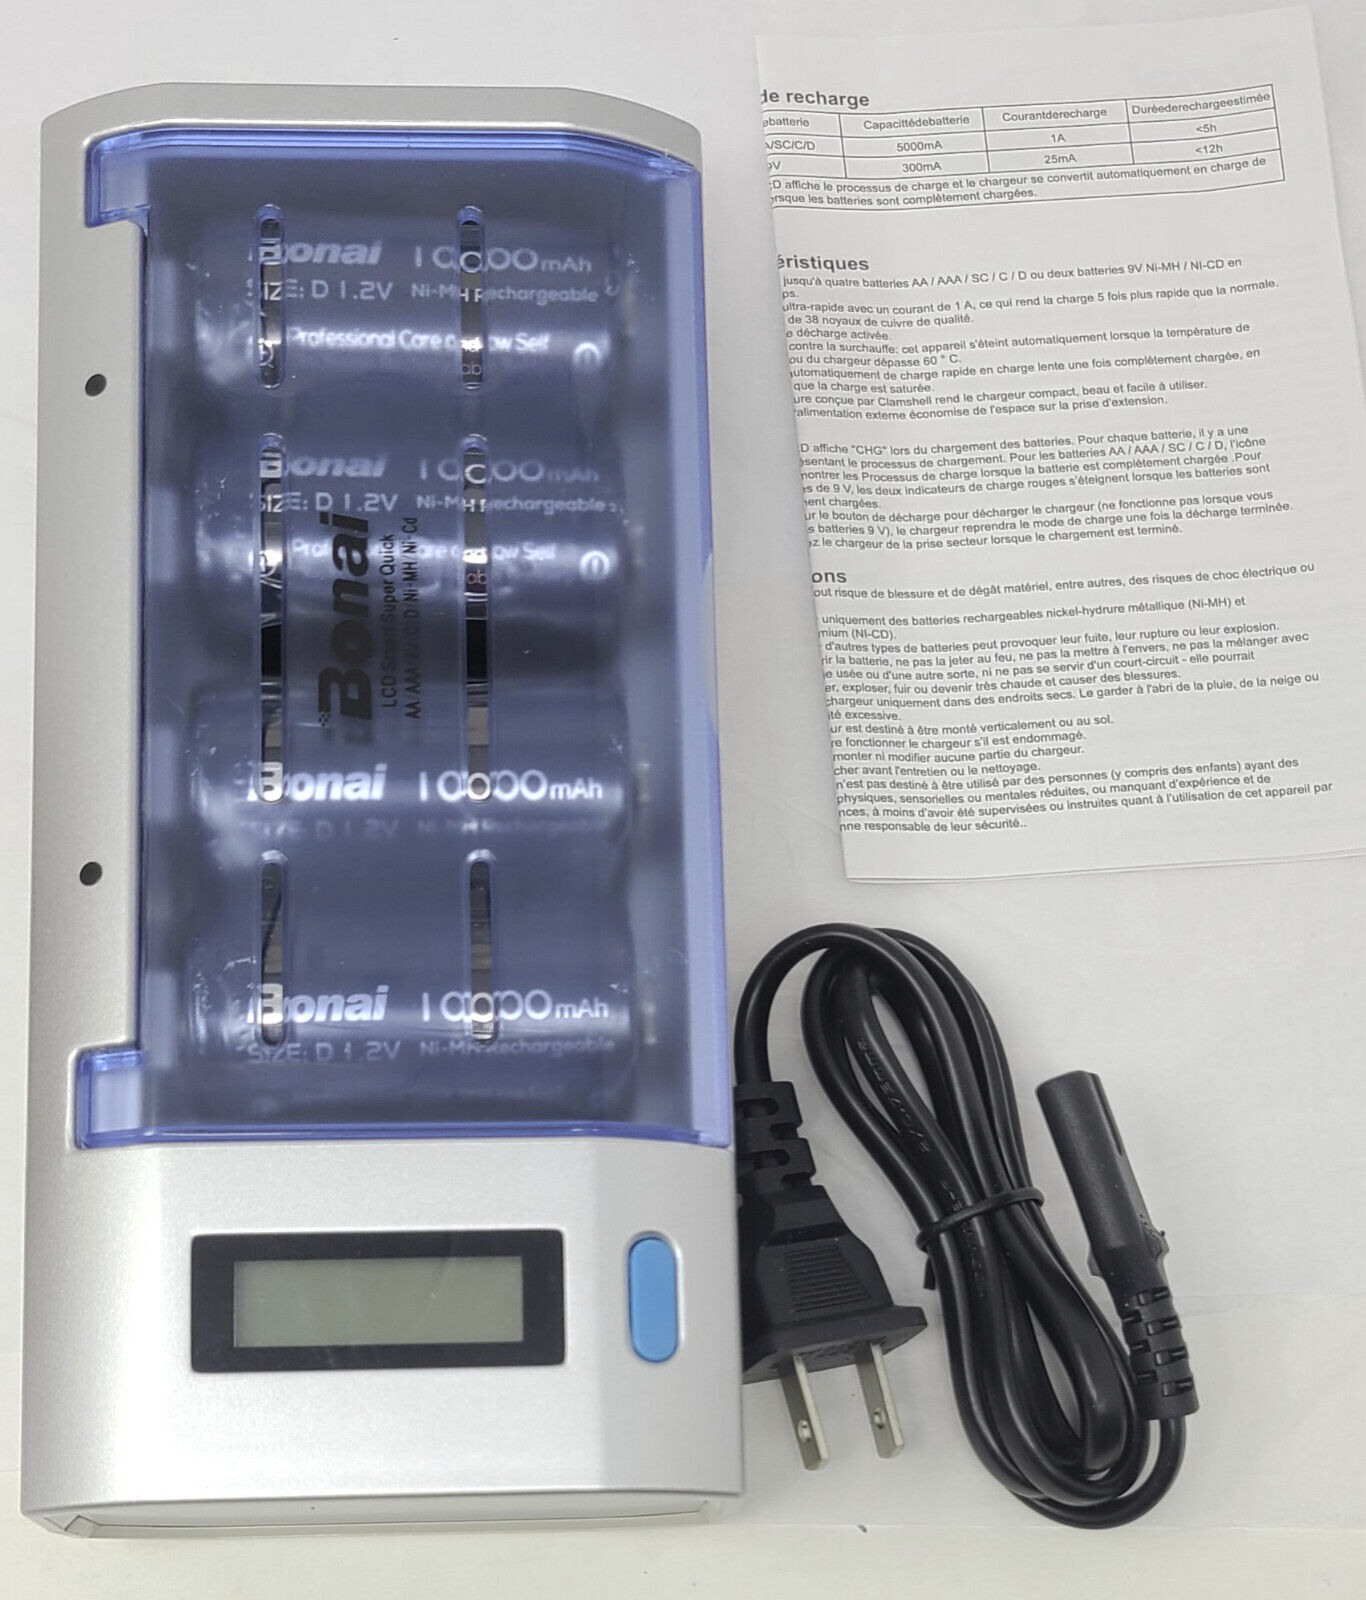 BONAI 9V Charger,2 Bay Independent Smart Battery Charger for 9V Rechargeable Li-ion & Ni-MH Batteries 